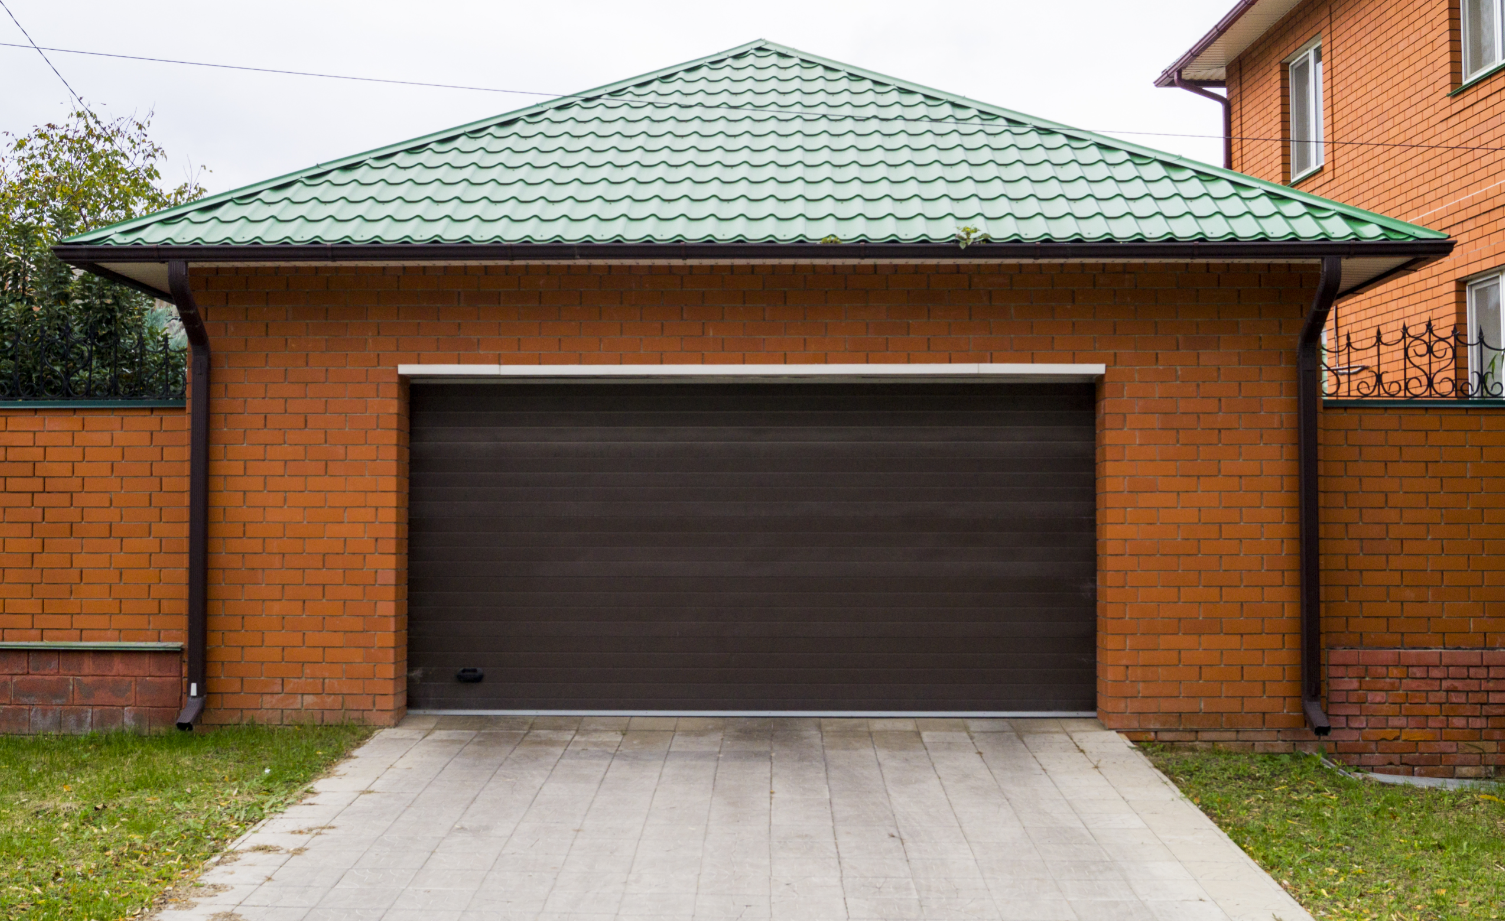 Choosing the right material for a garage @LidgetCompton